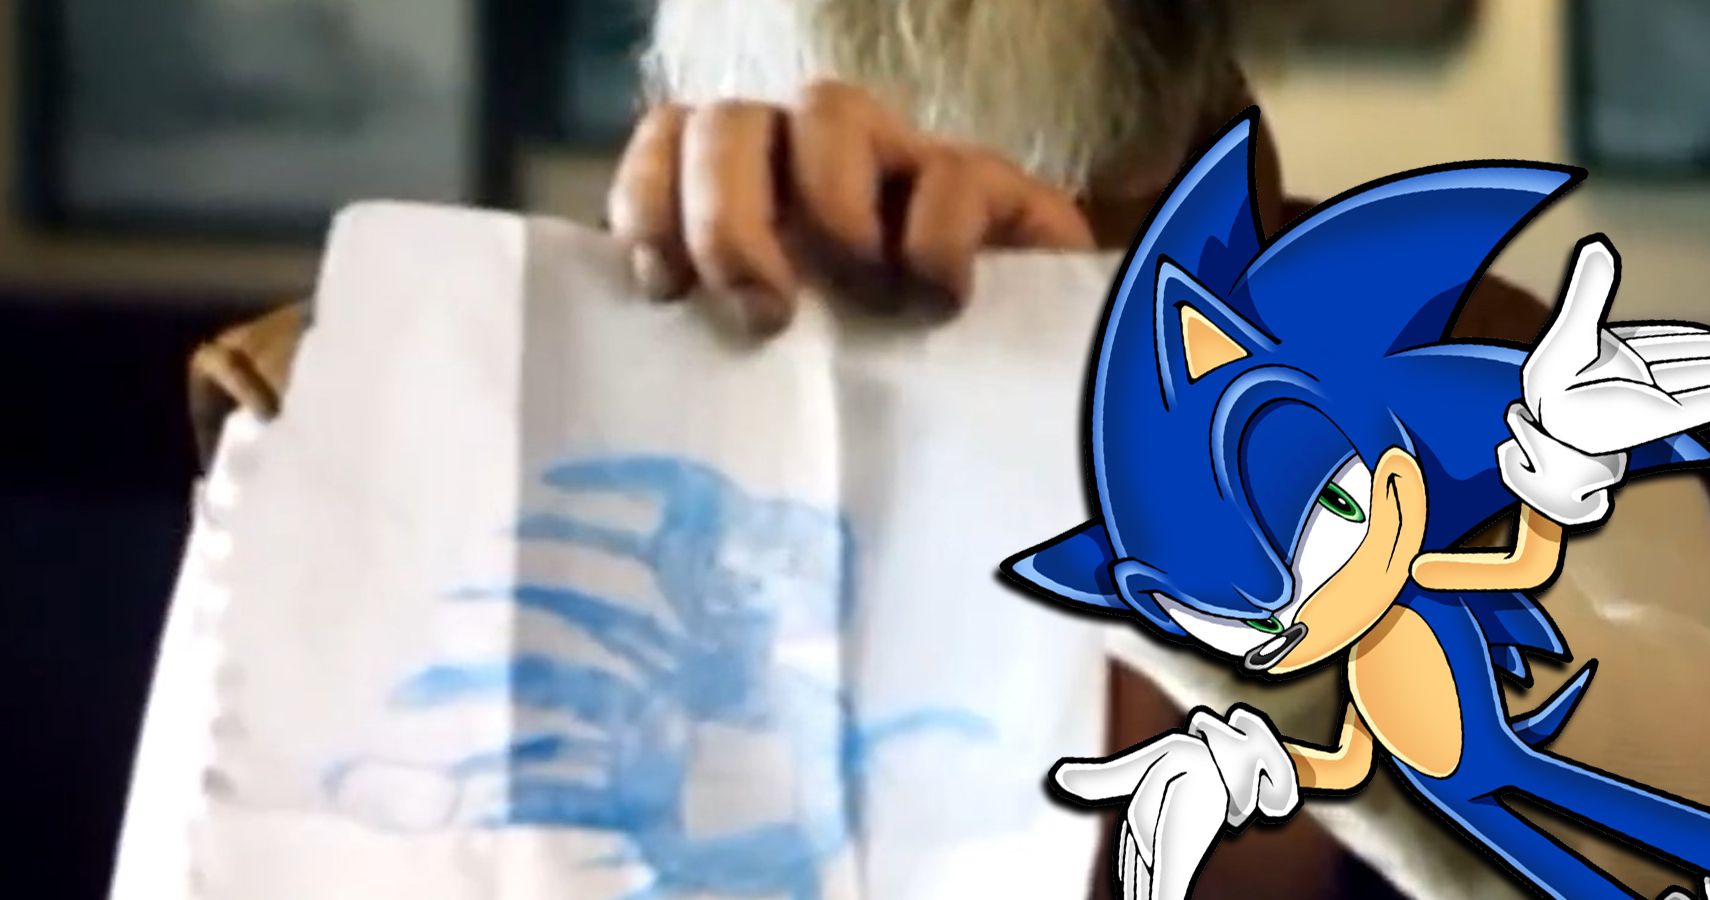 SONIC THE HEDGEHOG - First 8 Minutes Opening Scene (2020) 